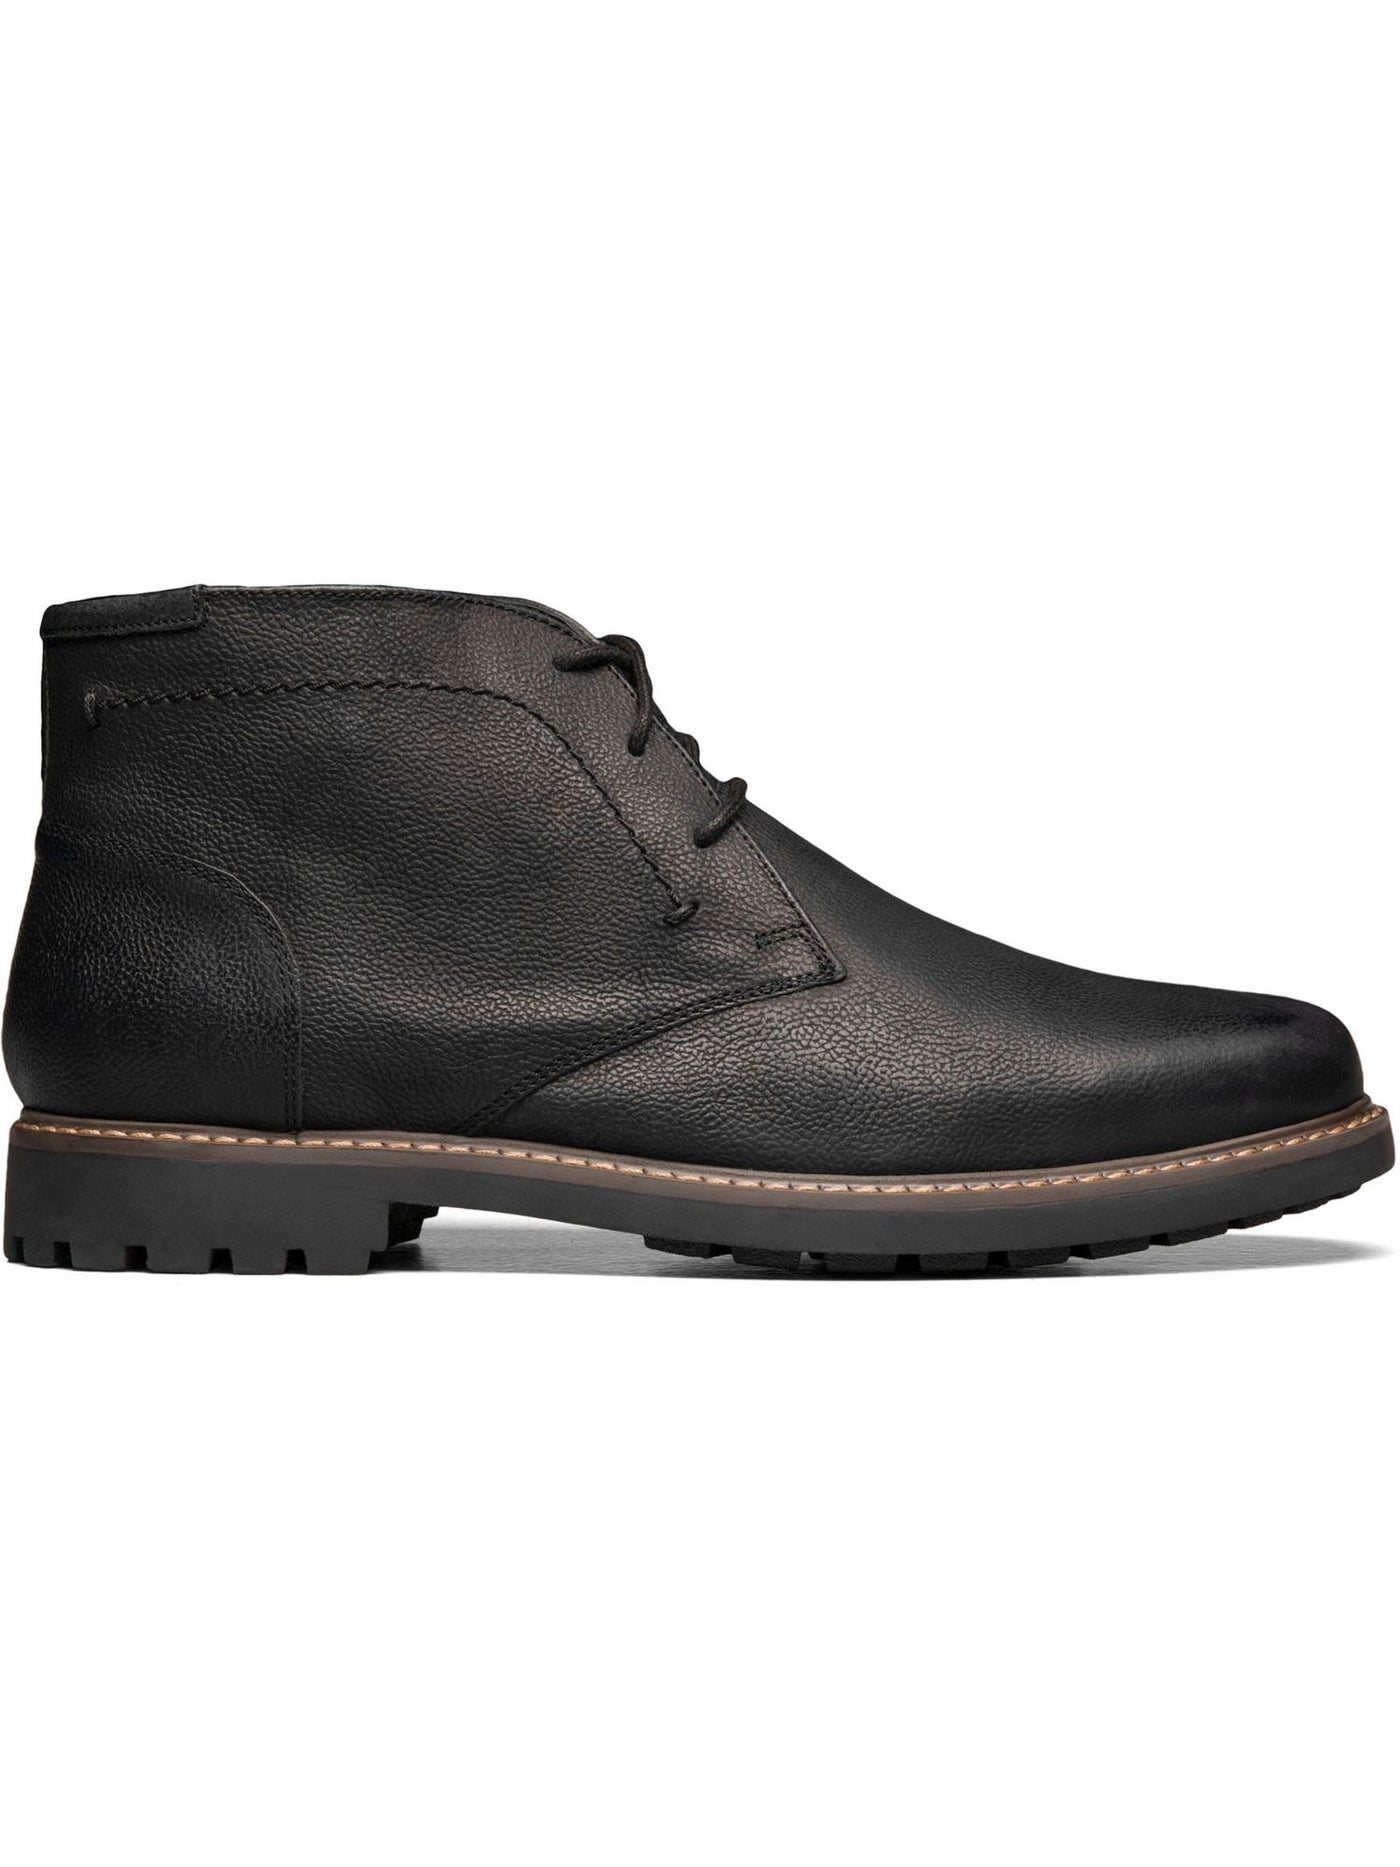 FLORSHEIM Mens Black Lug Sole Removable Insole Field Round Toe Block Heel Lace-Up Leather Chukka Boots 8 M